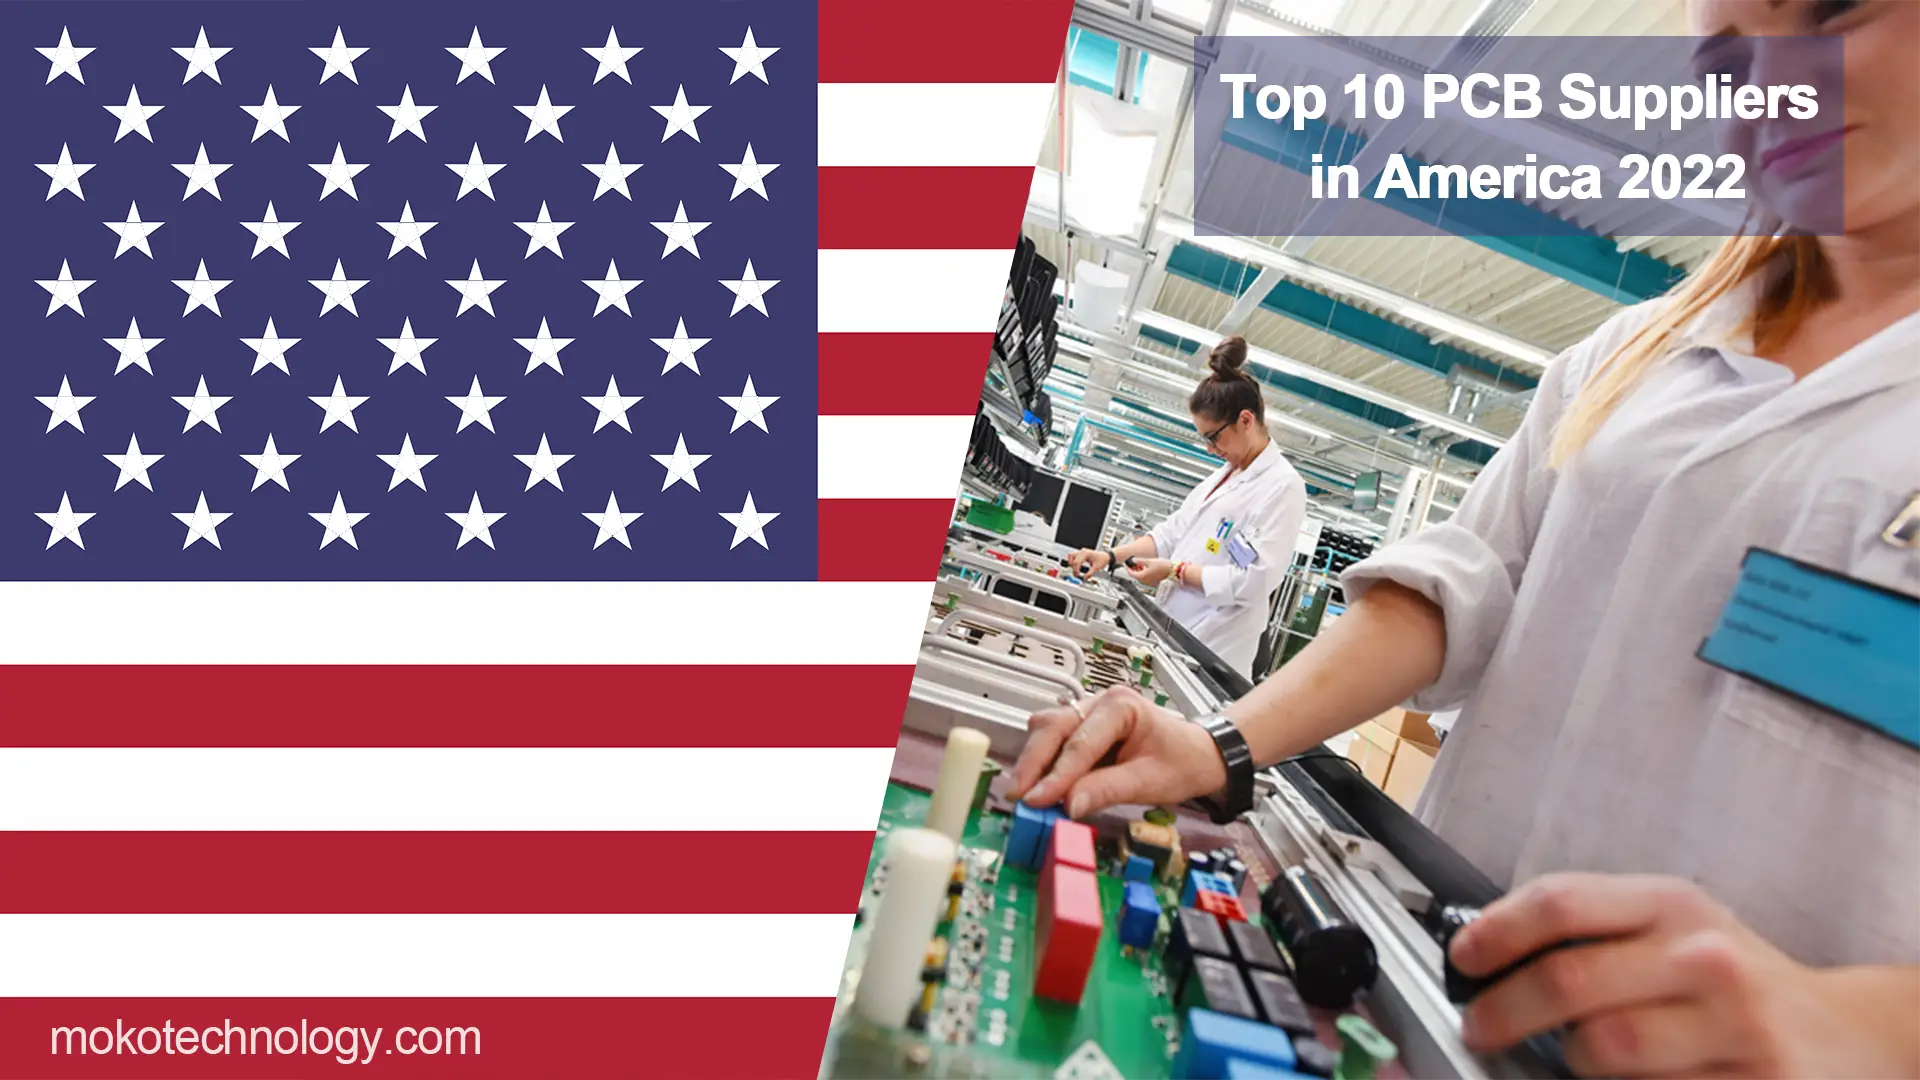 Top 10 PCB Suppliers in the USA 2022